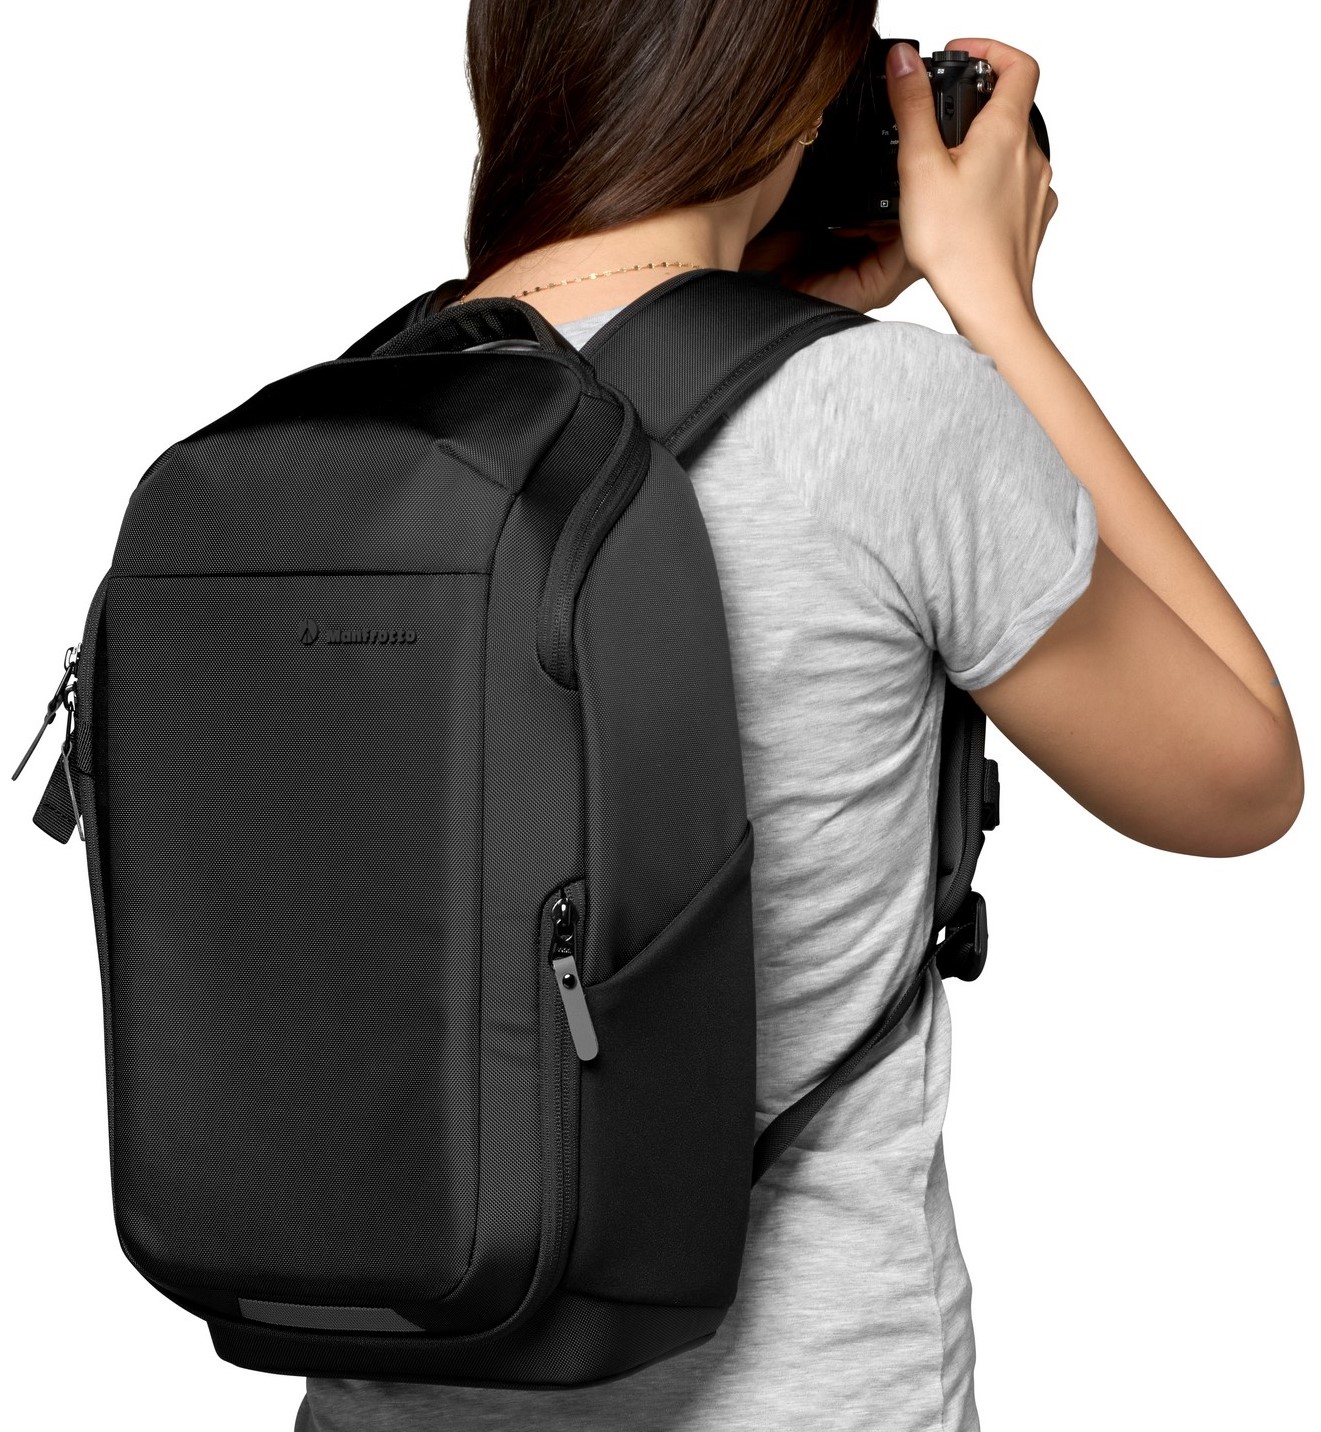  Backpack Manfrotto Advanced3 Compact III black